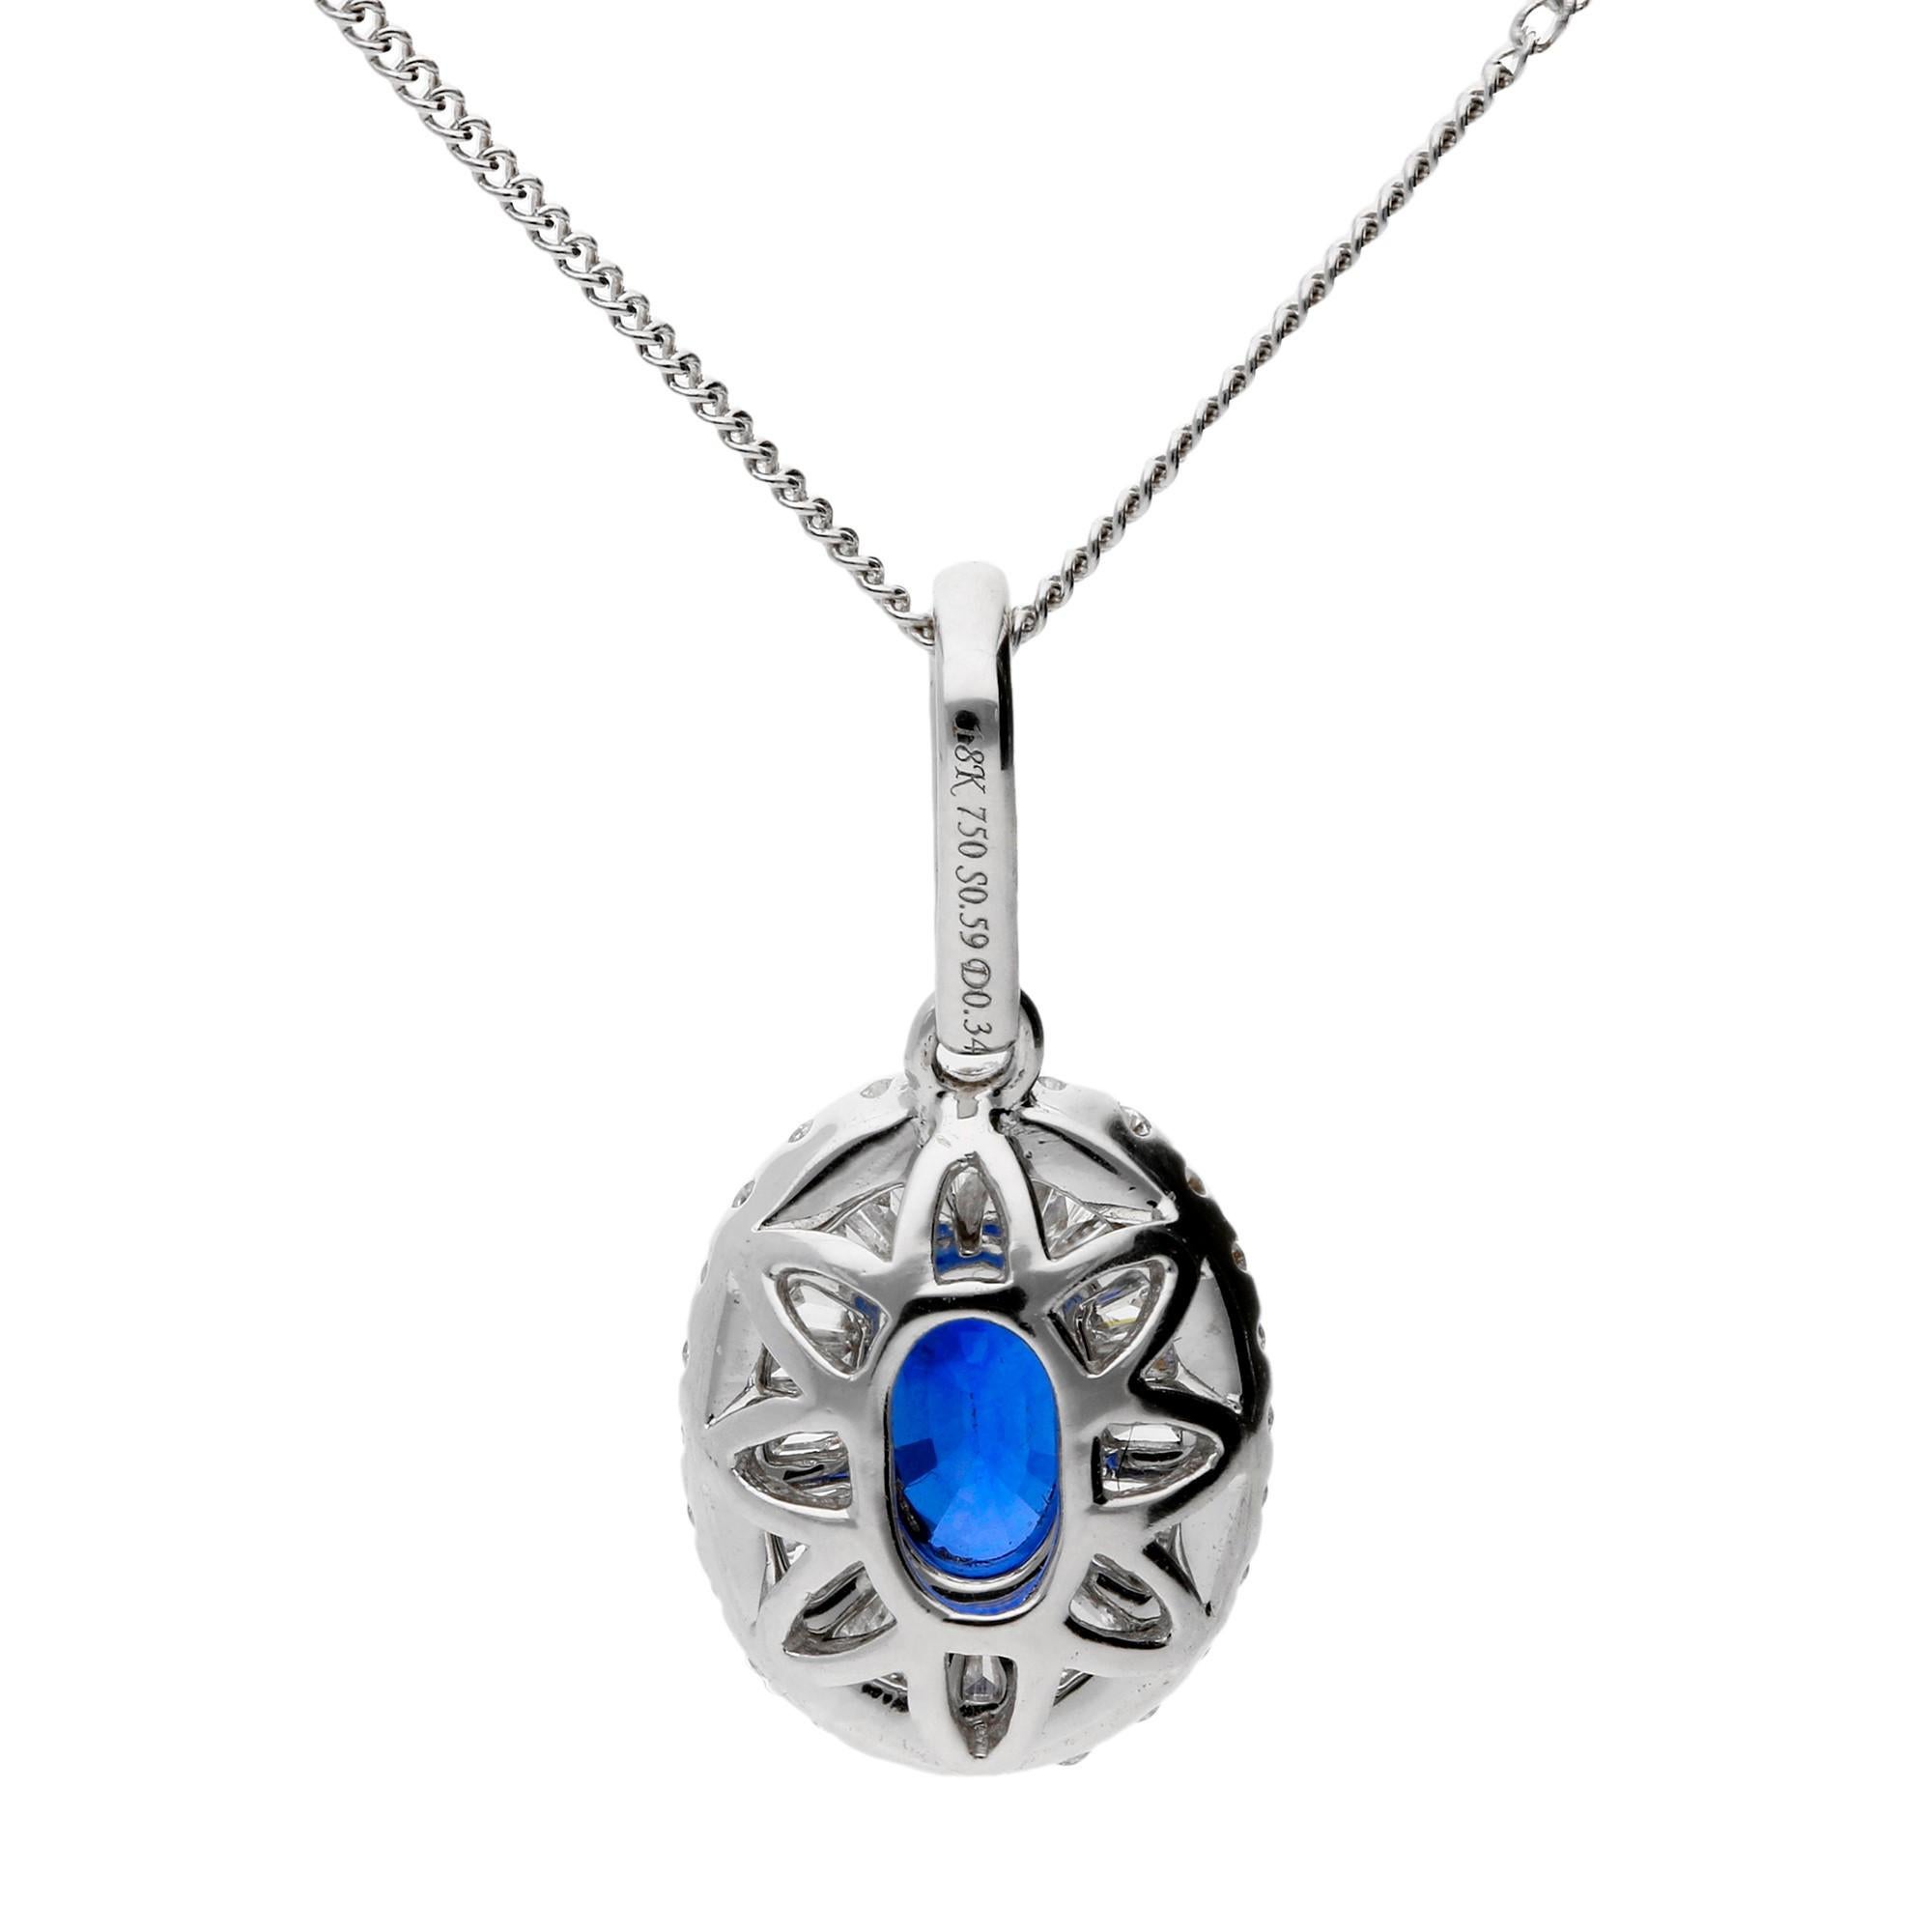 DESCRIPTION
A delightful white gold, sapphire and diamond oval cluster pendant.The sparkling opulence of the diamonds (0.34ct total) showcase this rich blue sapphire beautifully. A fabulous Deco inspired amulet of style and glamour with an